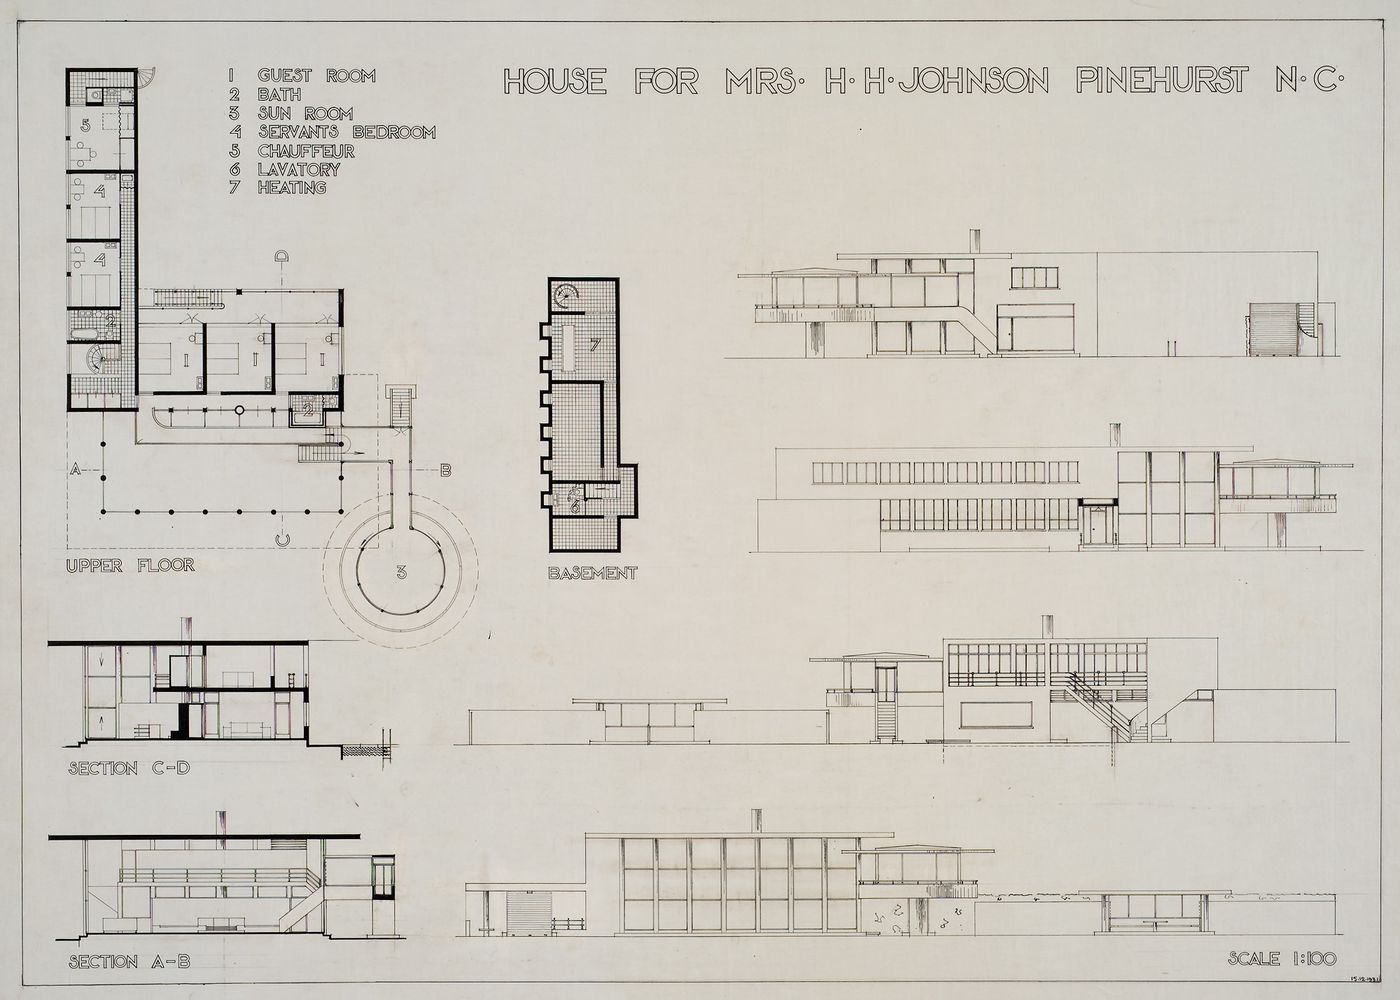 Plans, sections, and elevations for Johnson House, Pinehurst, North Carolina